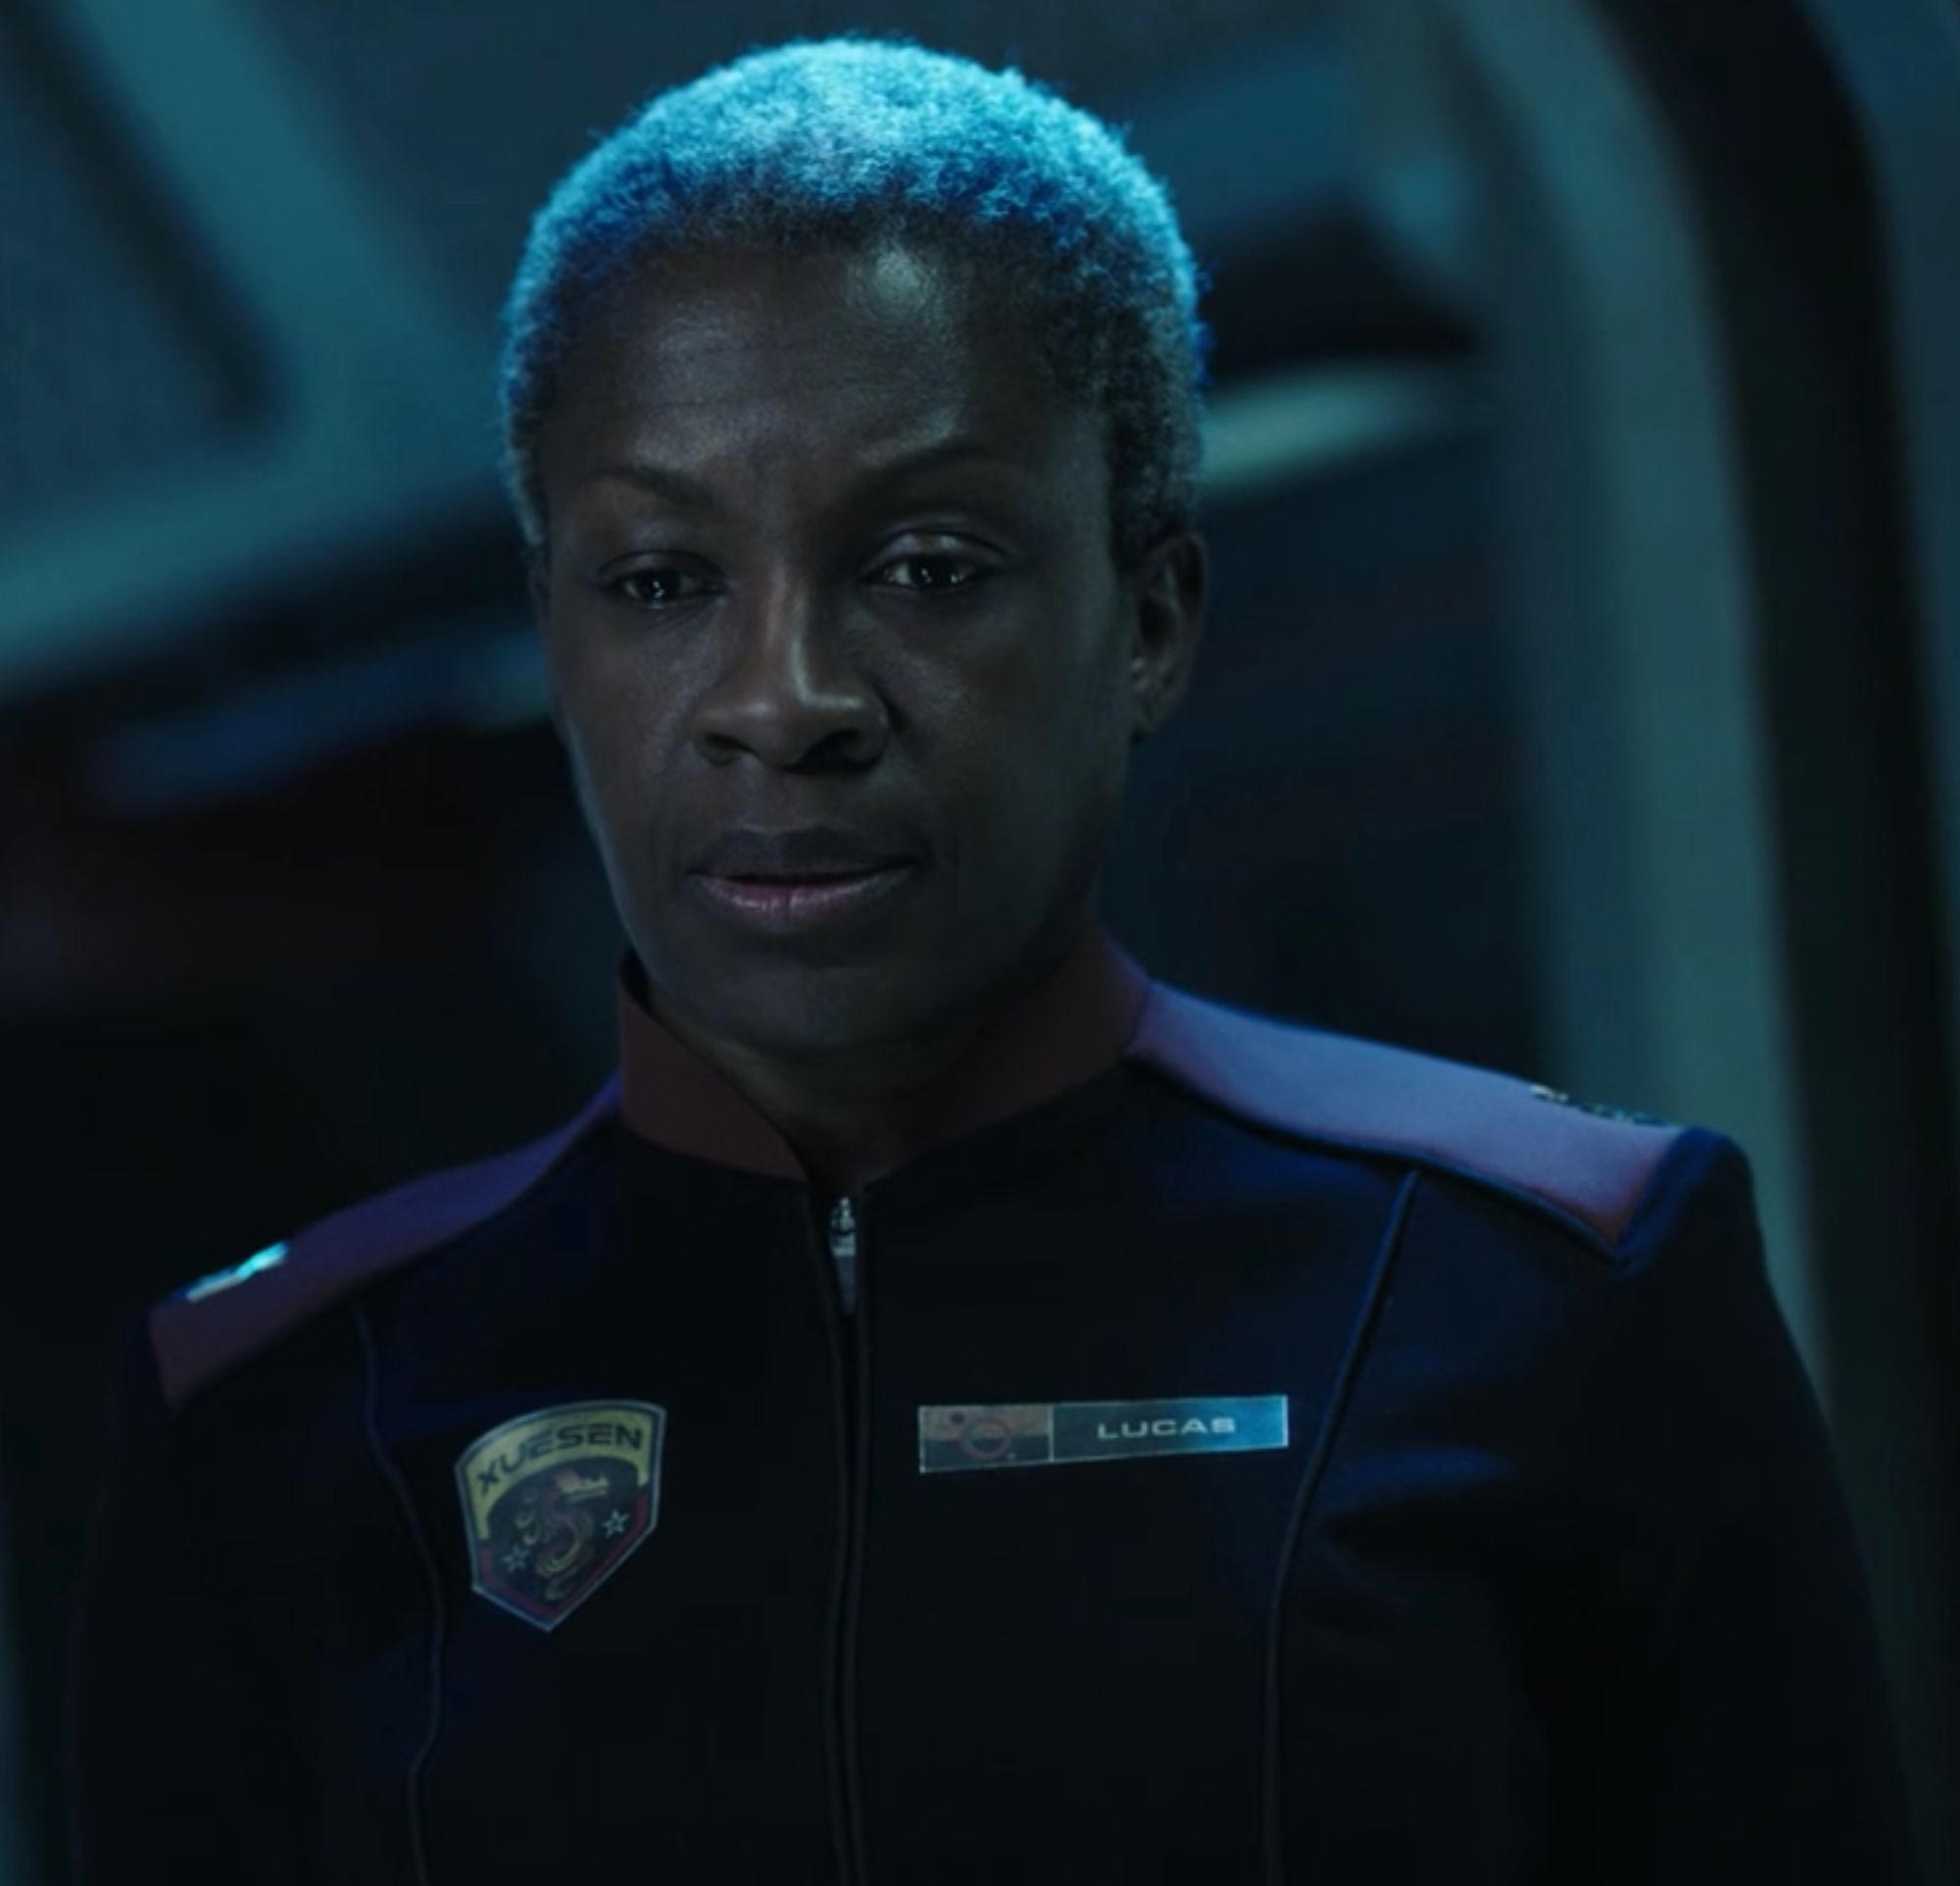 I love the Martian military uniforms in The Expanse